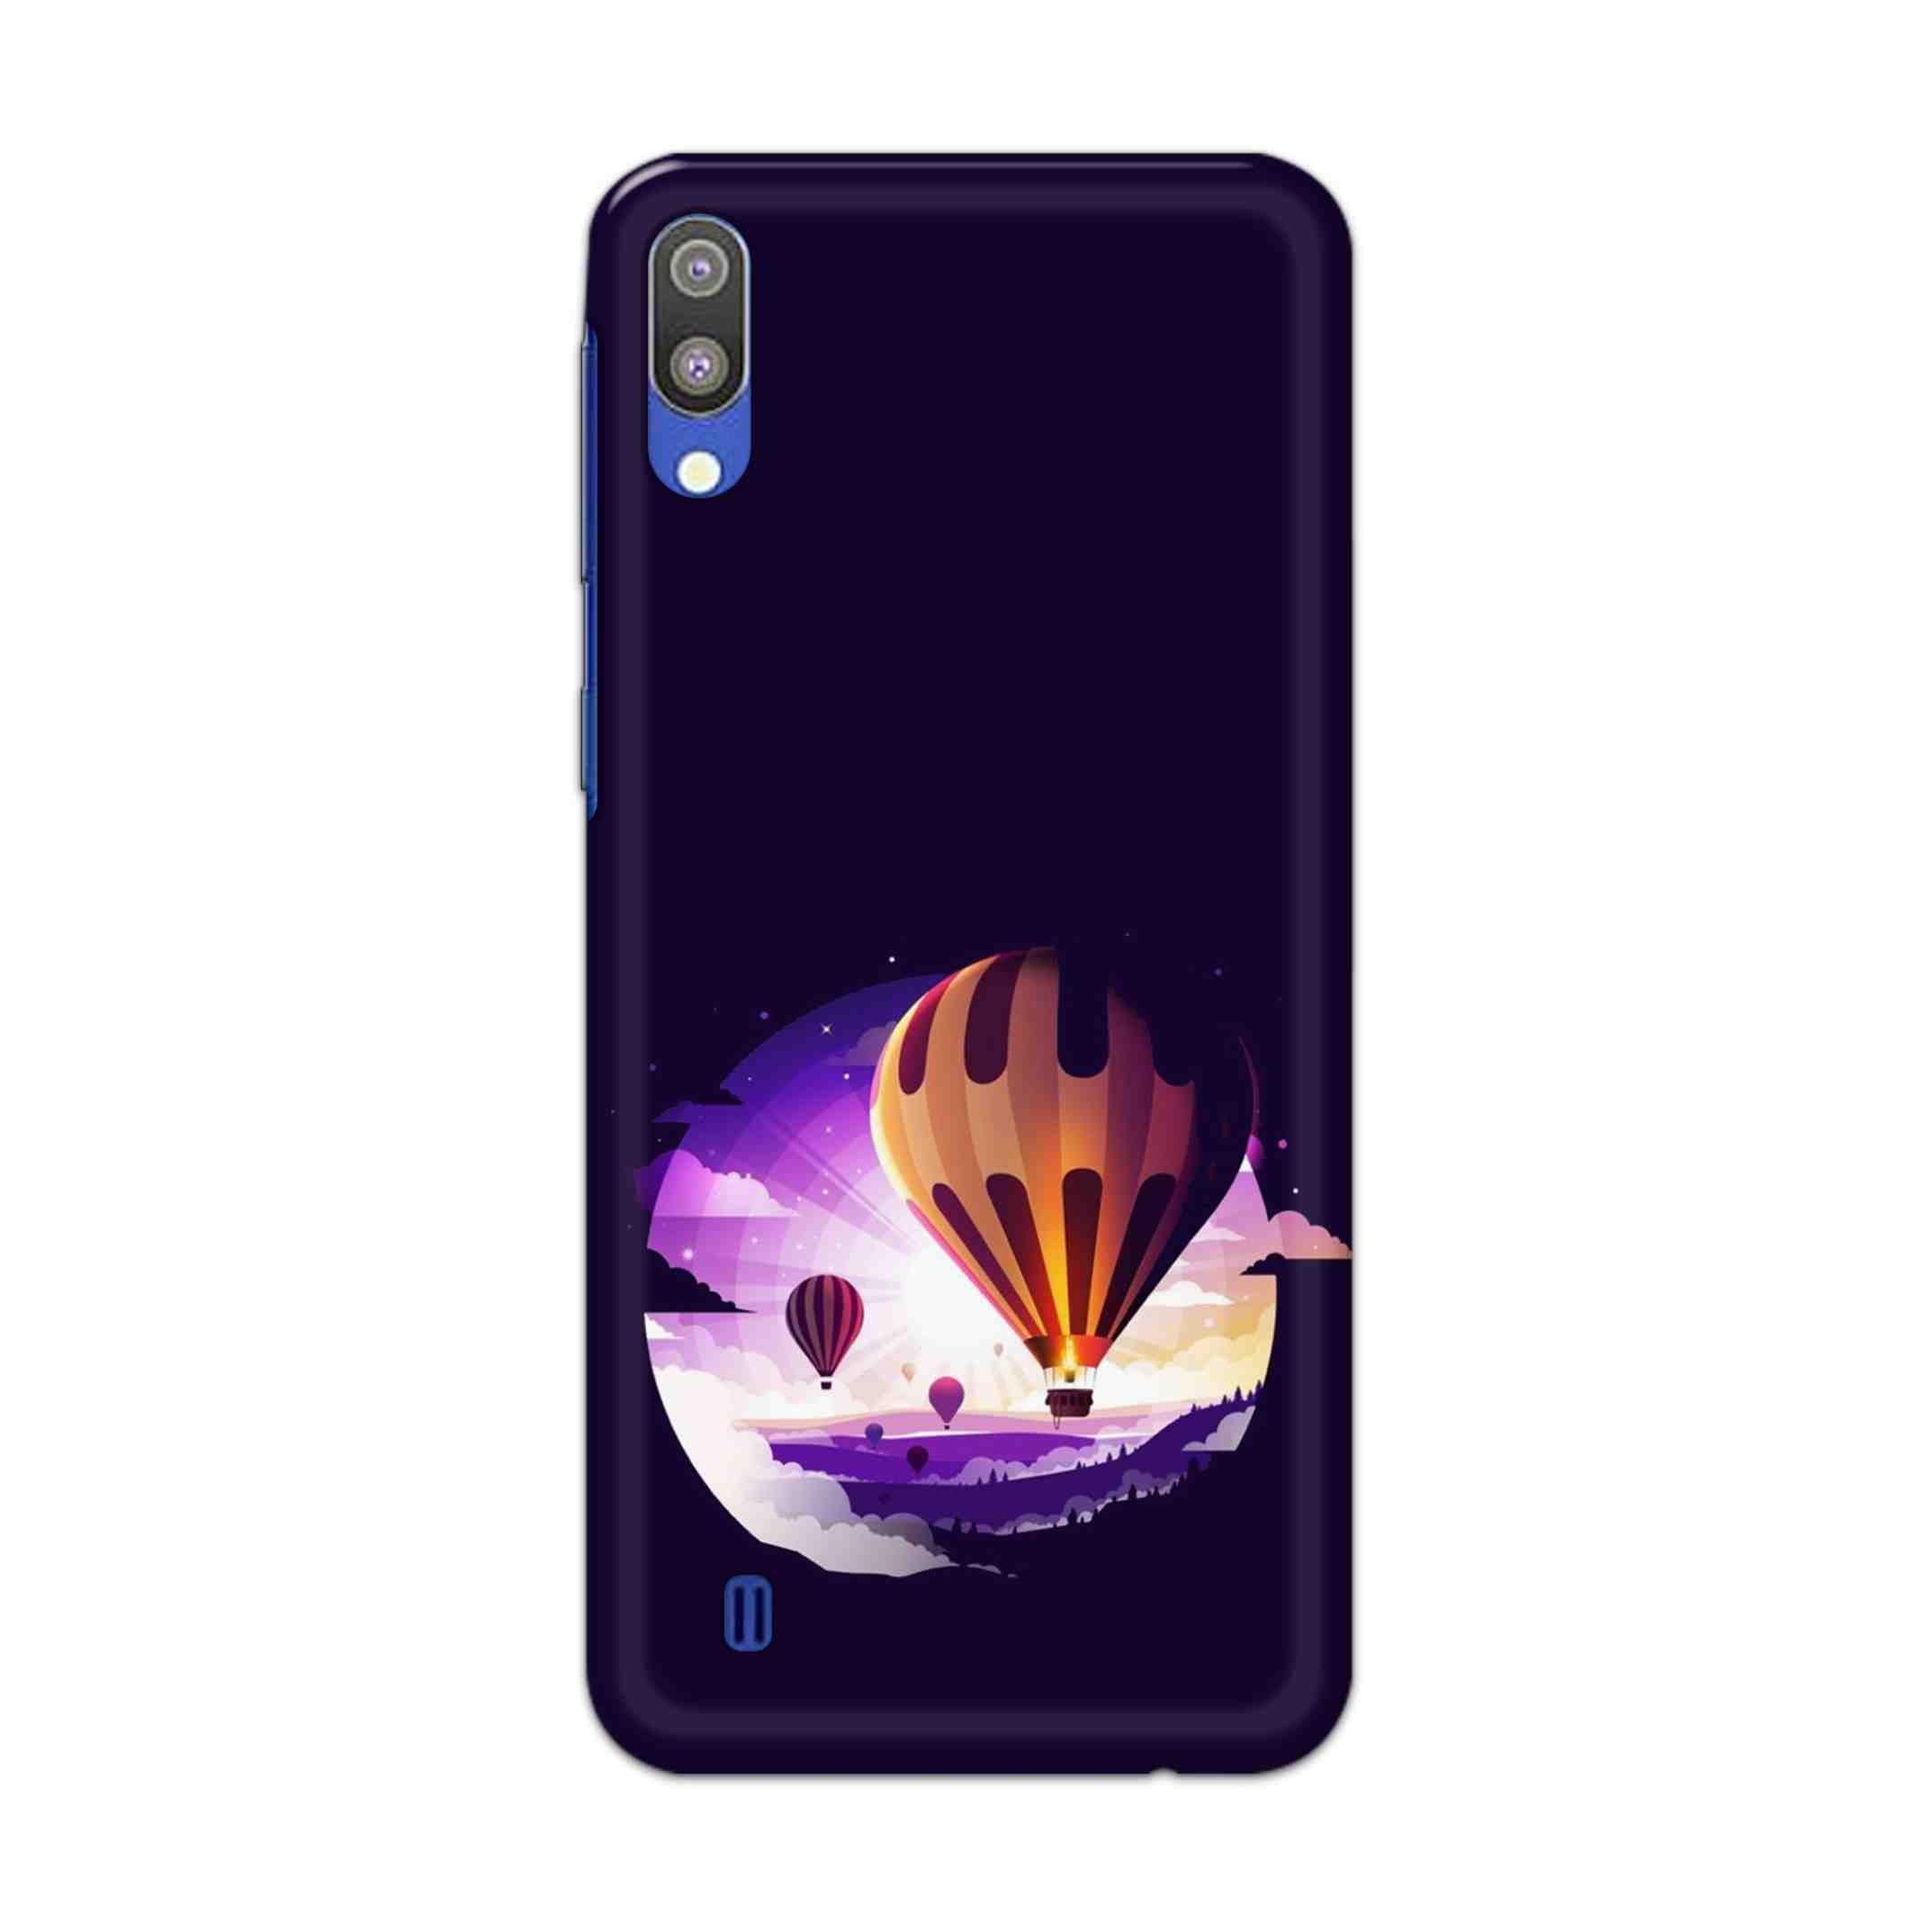 Buy Ballon Hard Back Mobile Phone Case Cover For Samsung Galaxy M10 Online